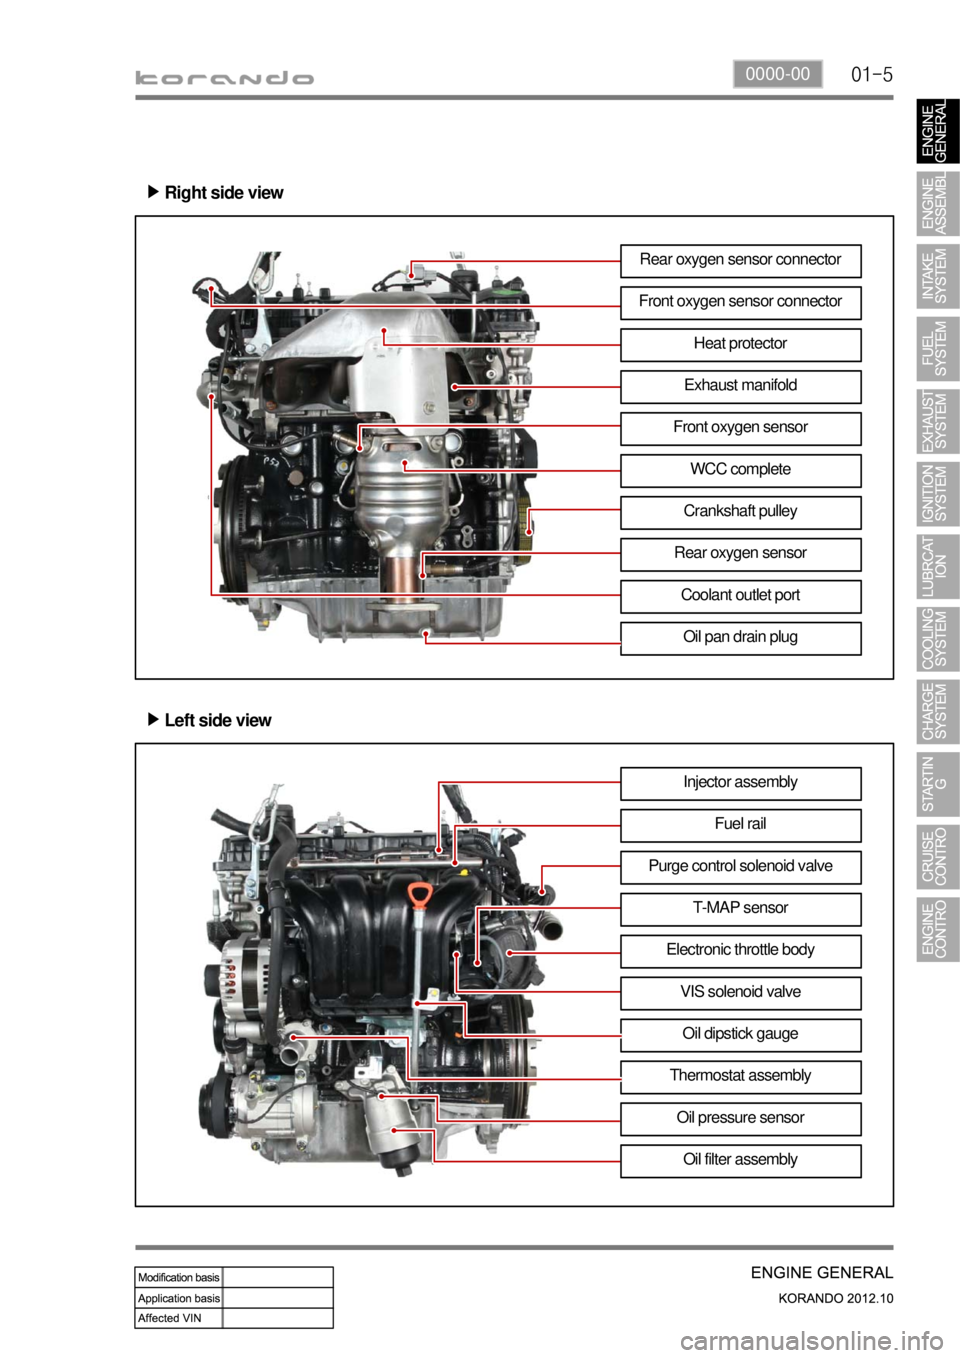 SSANGYONG KORANDO 2012  Service Manual 01-50000-00
Right side view ▶
Left side view ▶
Rear oxygen sensor connector
Front oxygen sensor connector
Exhaust manifoldHeat protector
Front oxygen sensor
WCC complete
Crankshaft pulley
Oil pan 